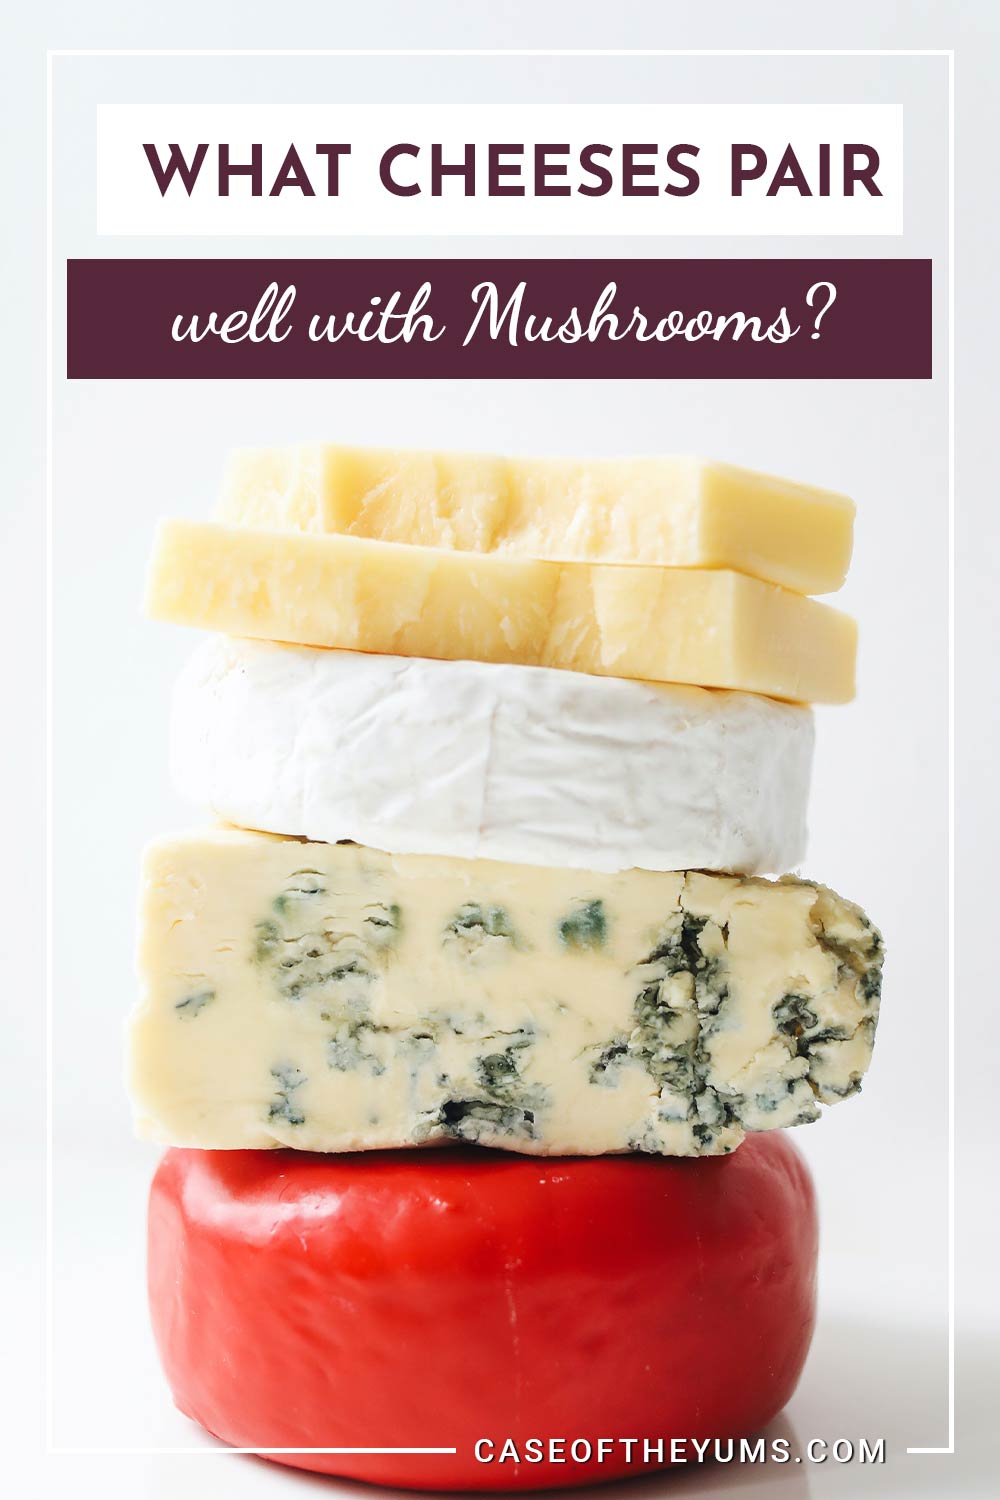 Various types of cheese in front of white surface -What Cheeses pair well with Mushrooms?